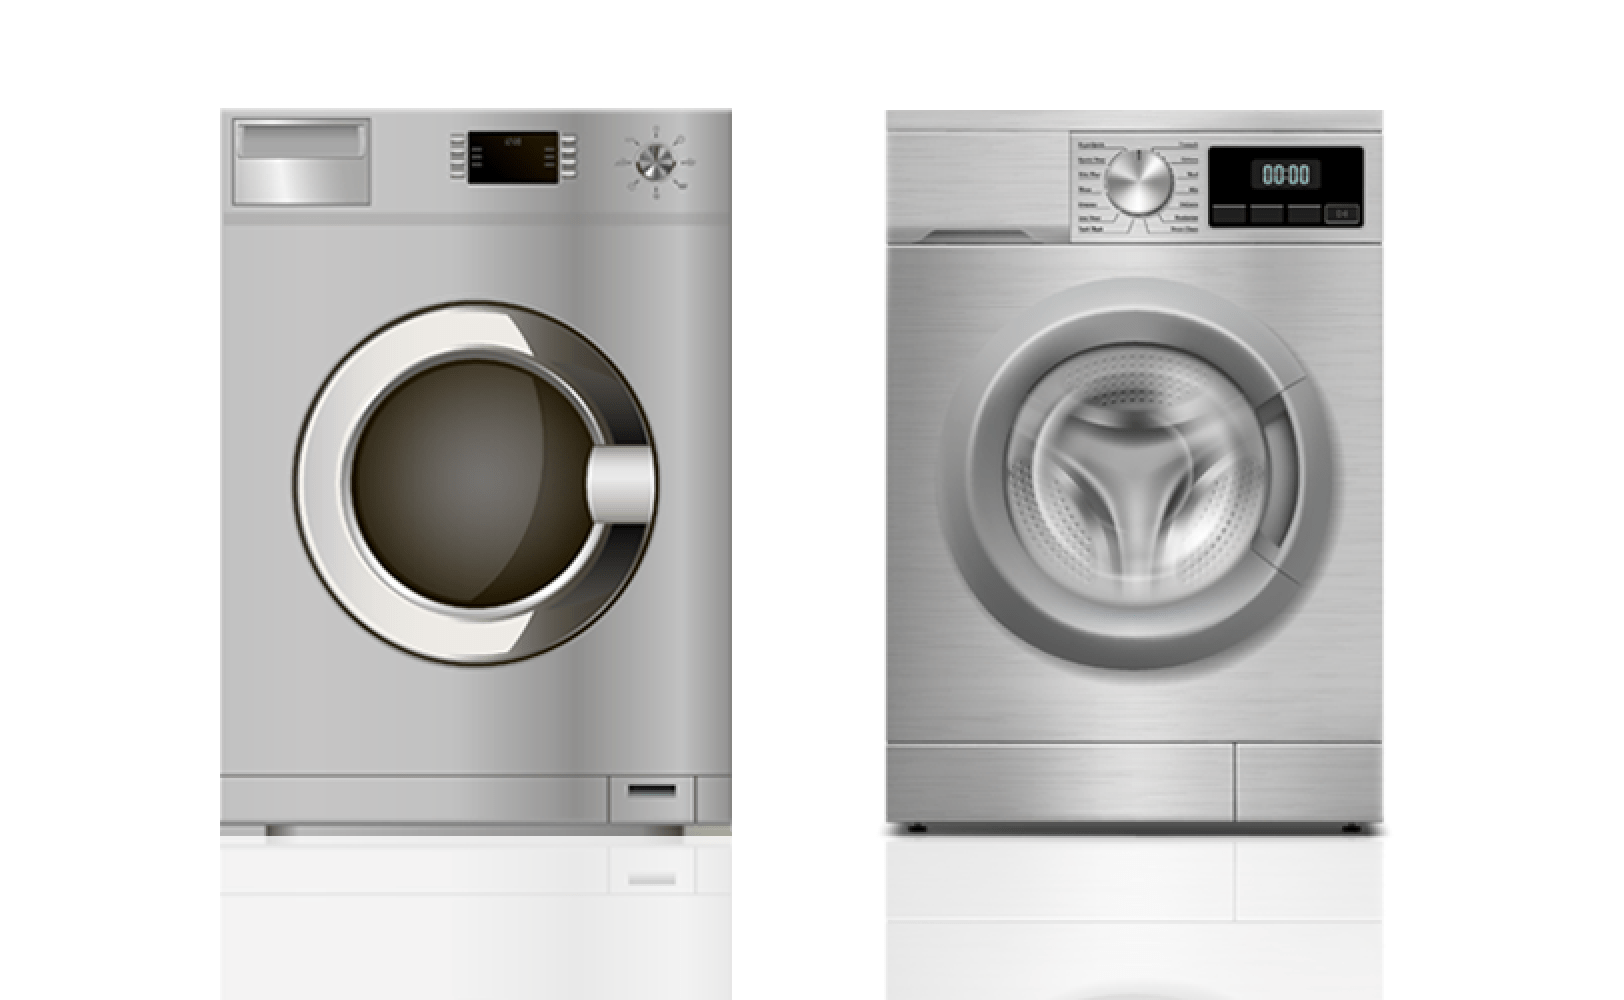 Washer Repair Service in North Wales